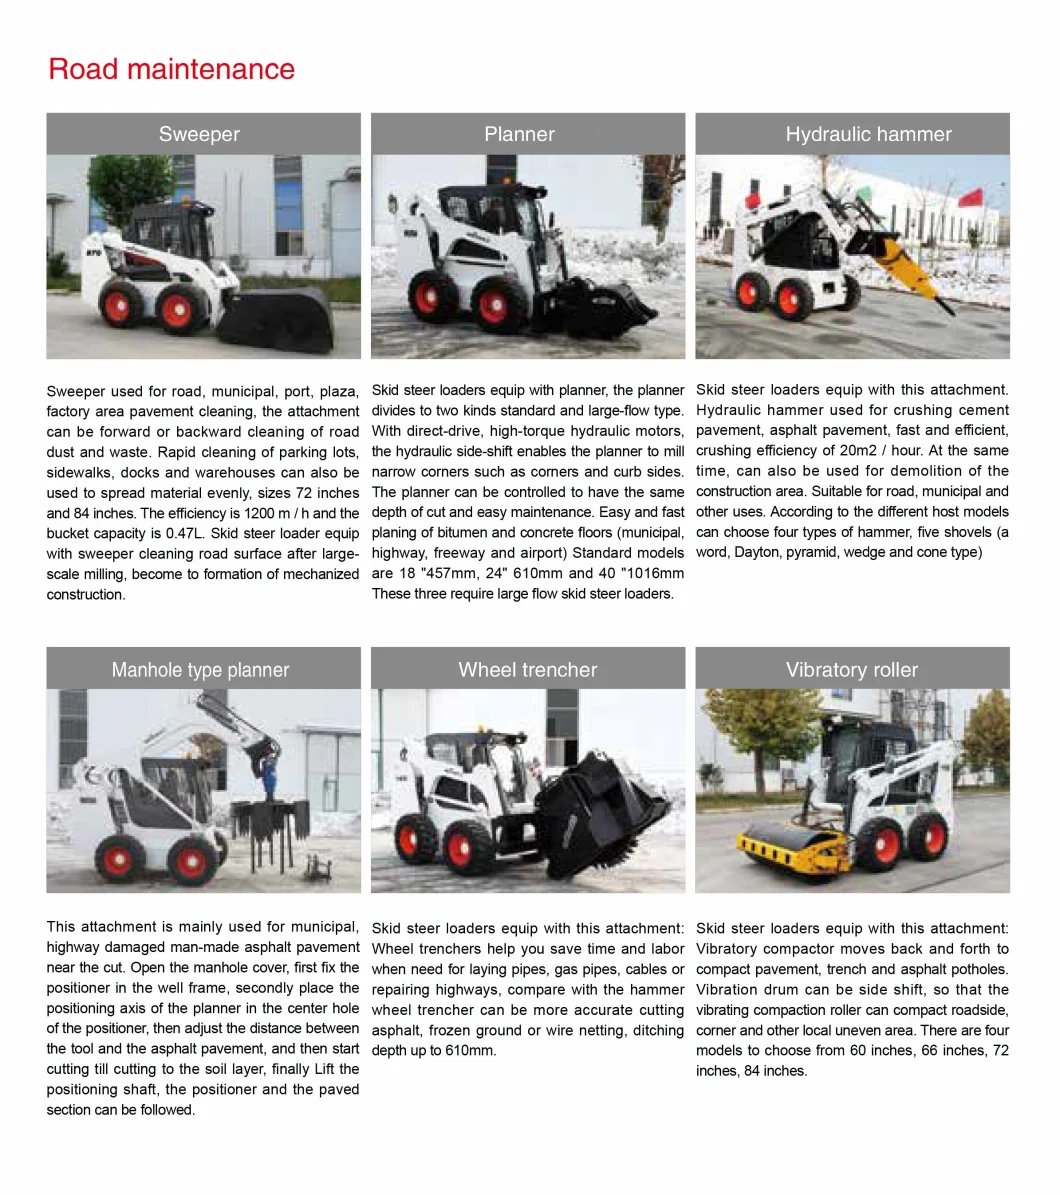 Vochains Skid Steer Loader with Sweeper Used for Road Maintenance